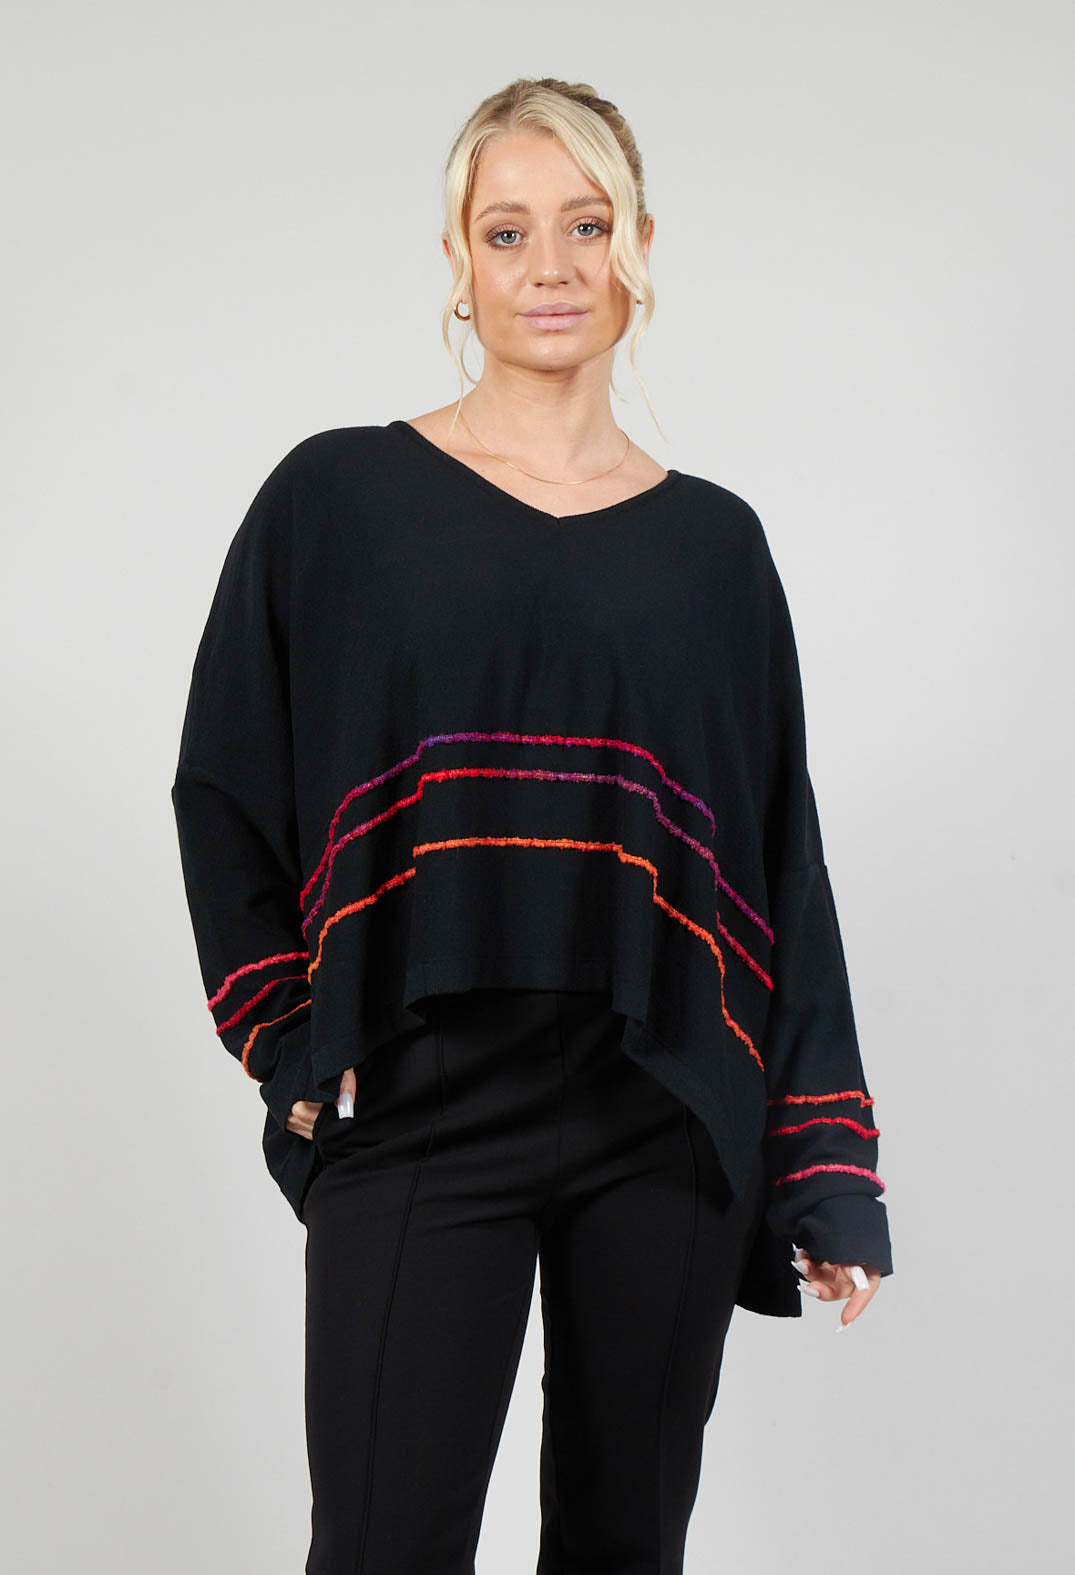 Jumper in Black with Red Stripe